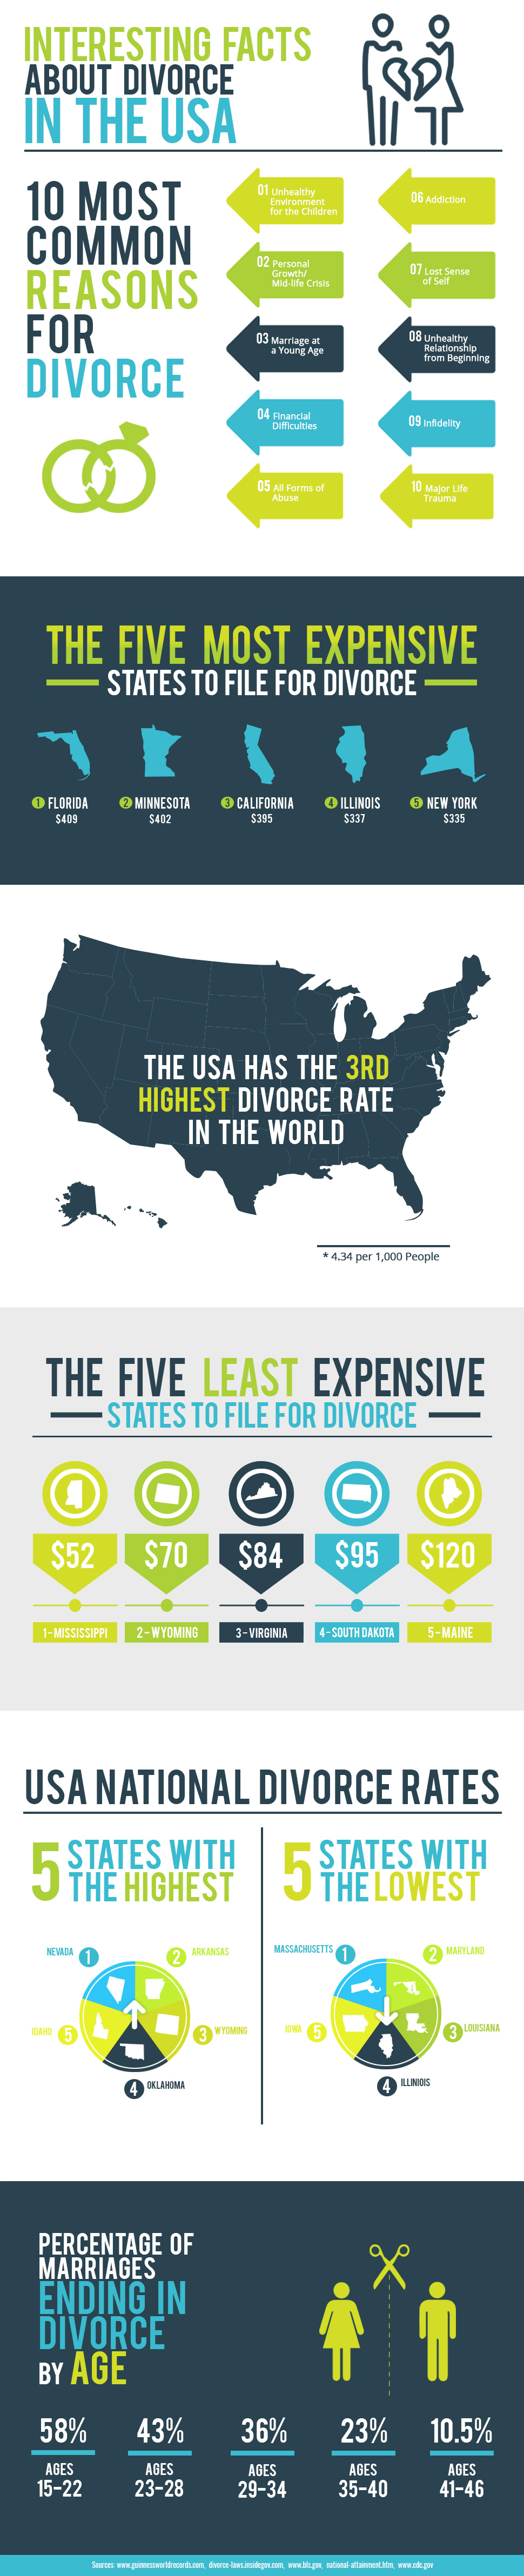 Interesting Facts About Divorce - Infographic